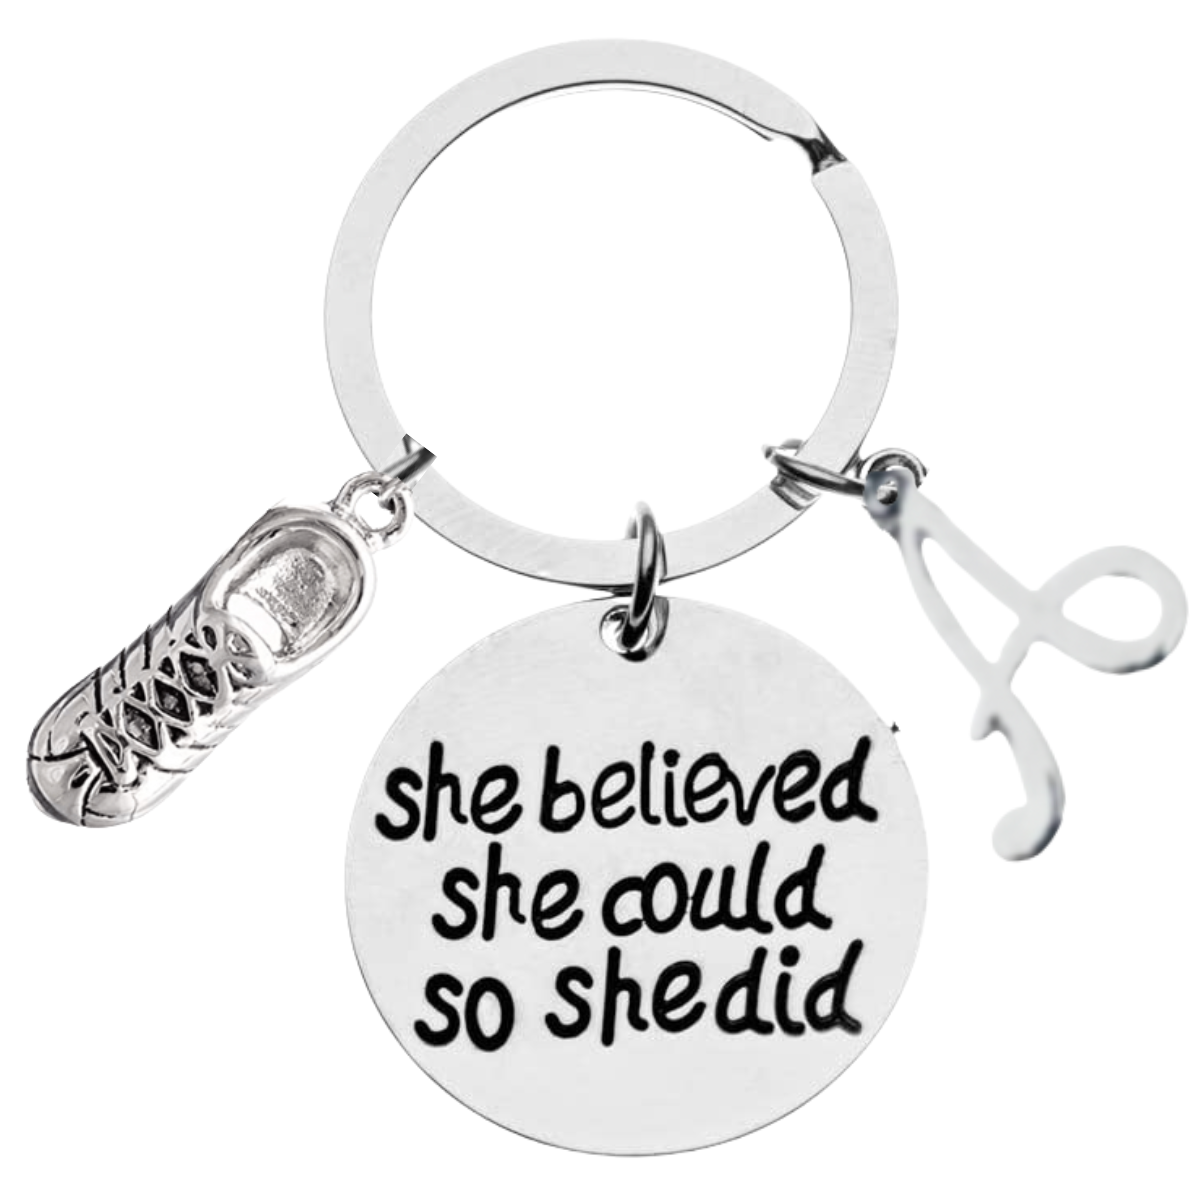 Personalized Runner Keychain, Runner She Believed She Could So She Did Keychain